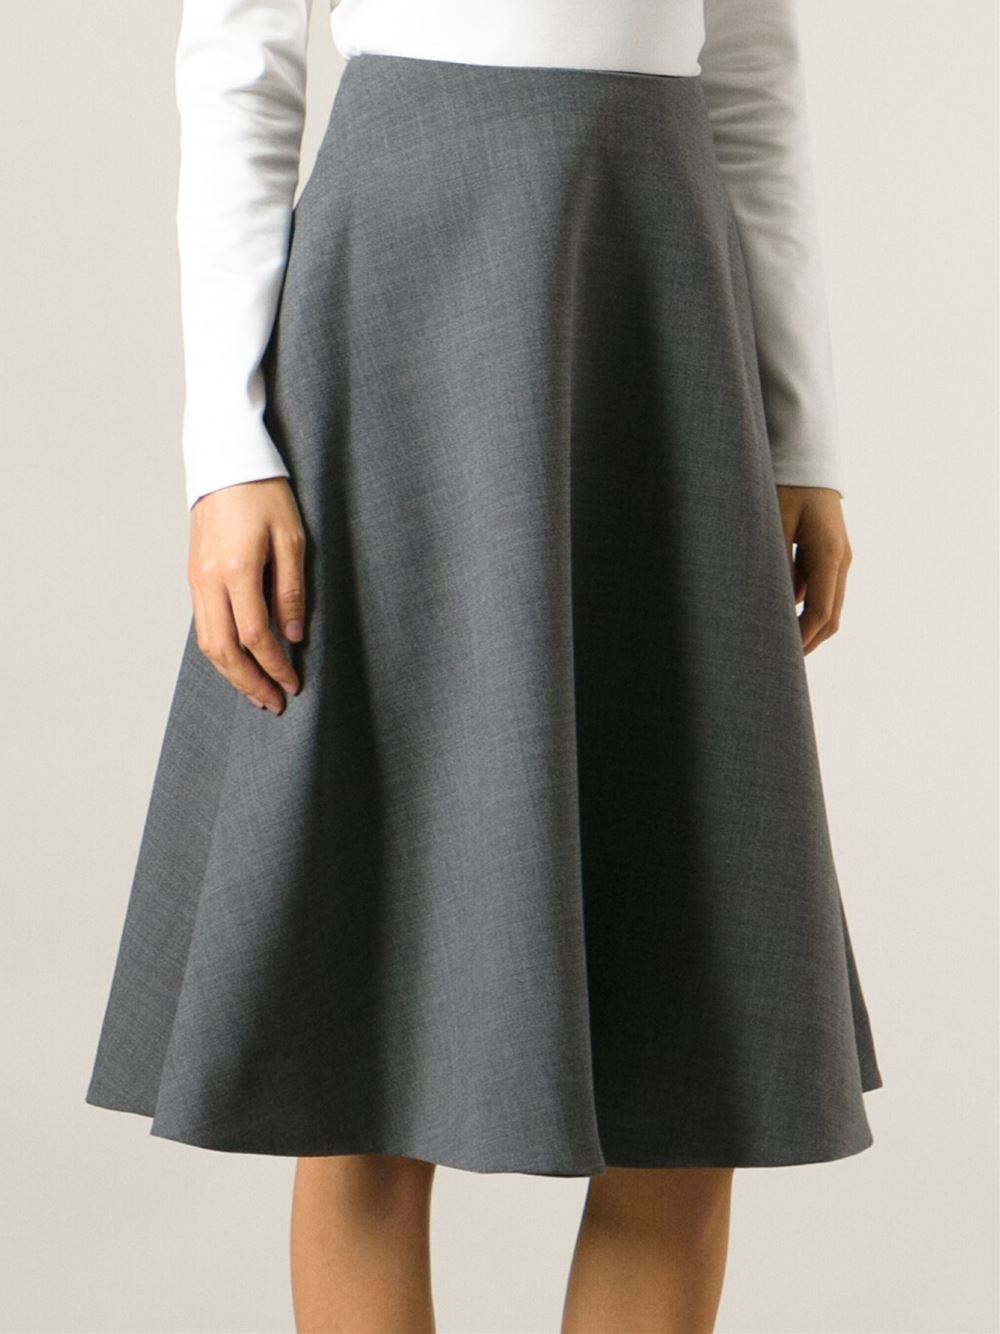 Marc by marc jacobs A-Line Midi Skirt in Gray | Lyst